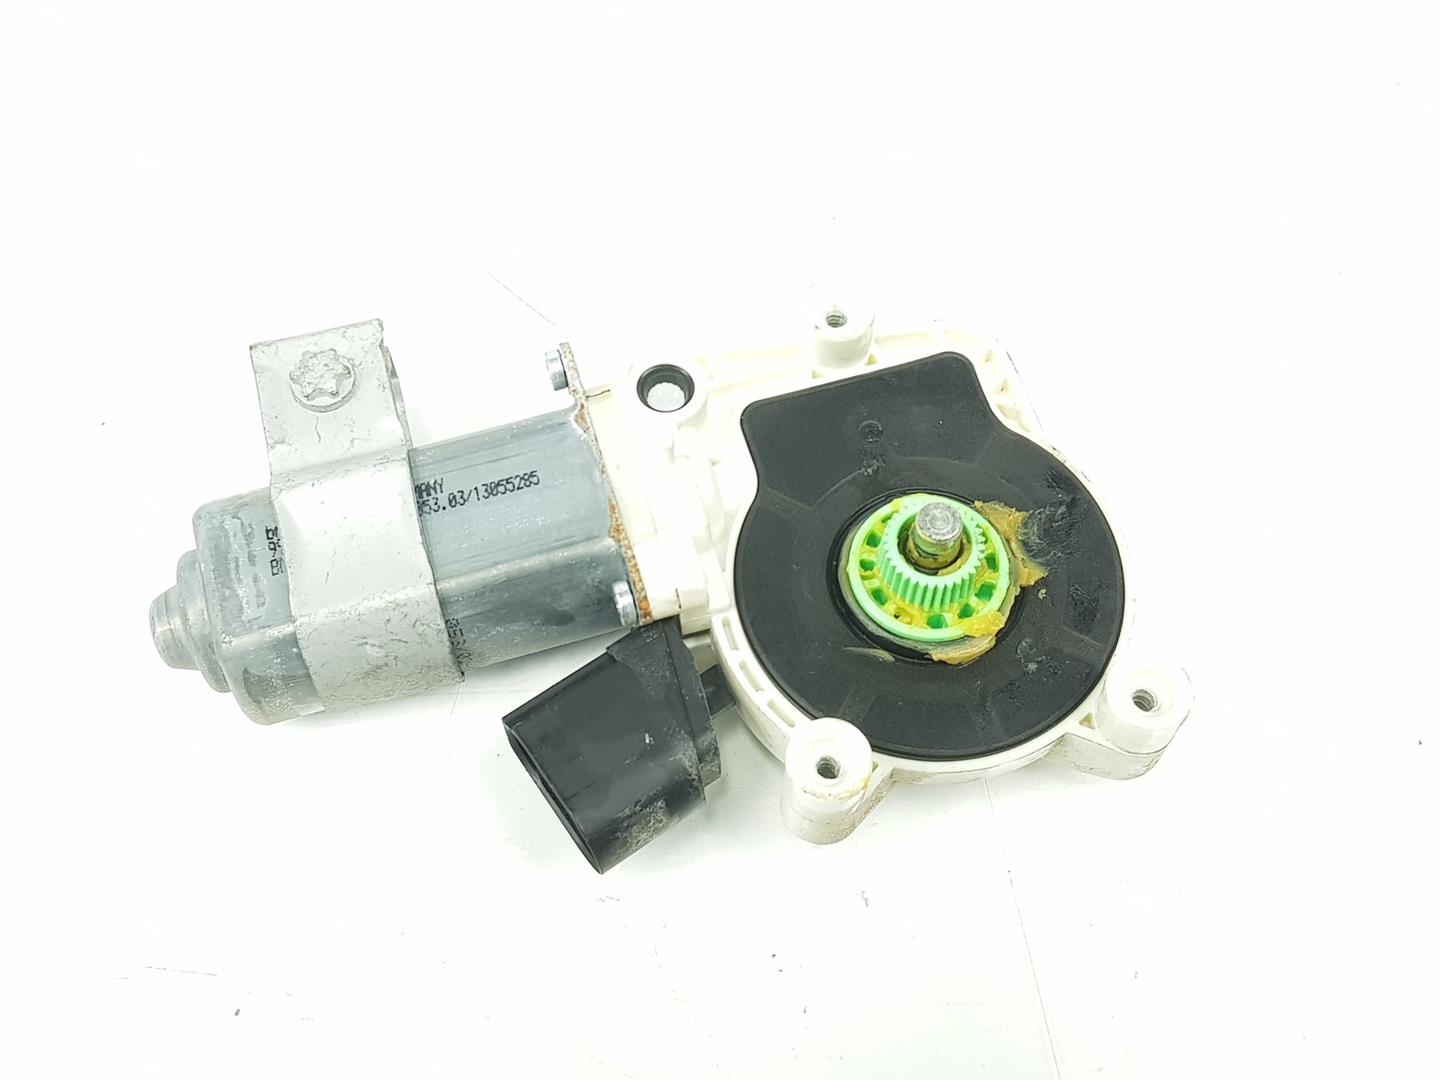 BMW M5 E60/E61 (2004-2010) Front Right Door Window Control Motor 67626981142, 13055285, 6PINES 19771839